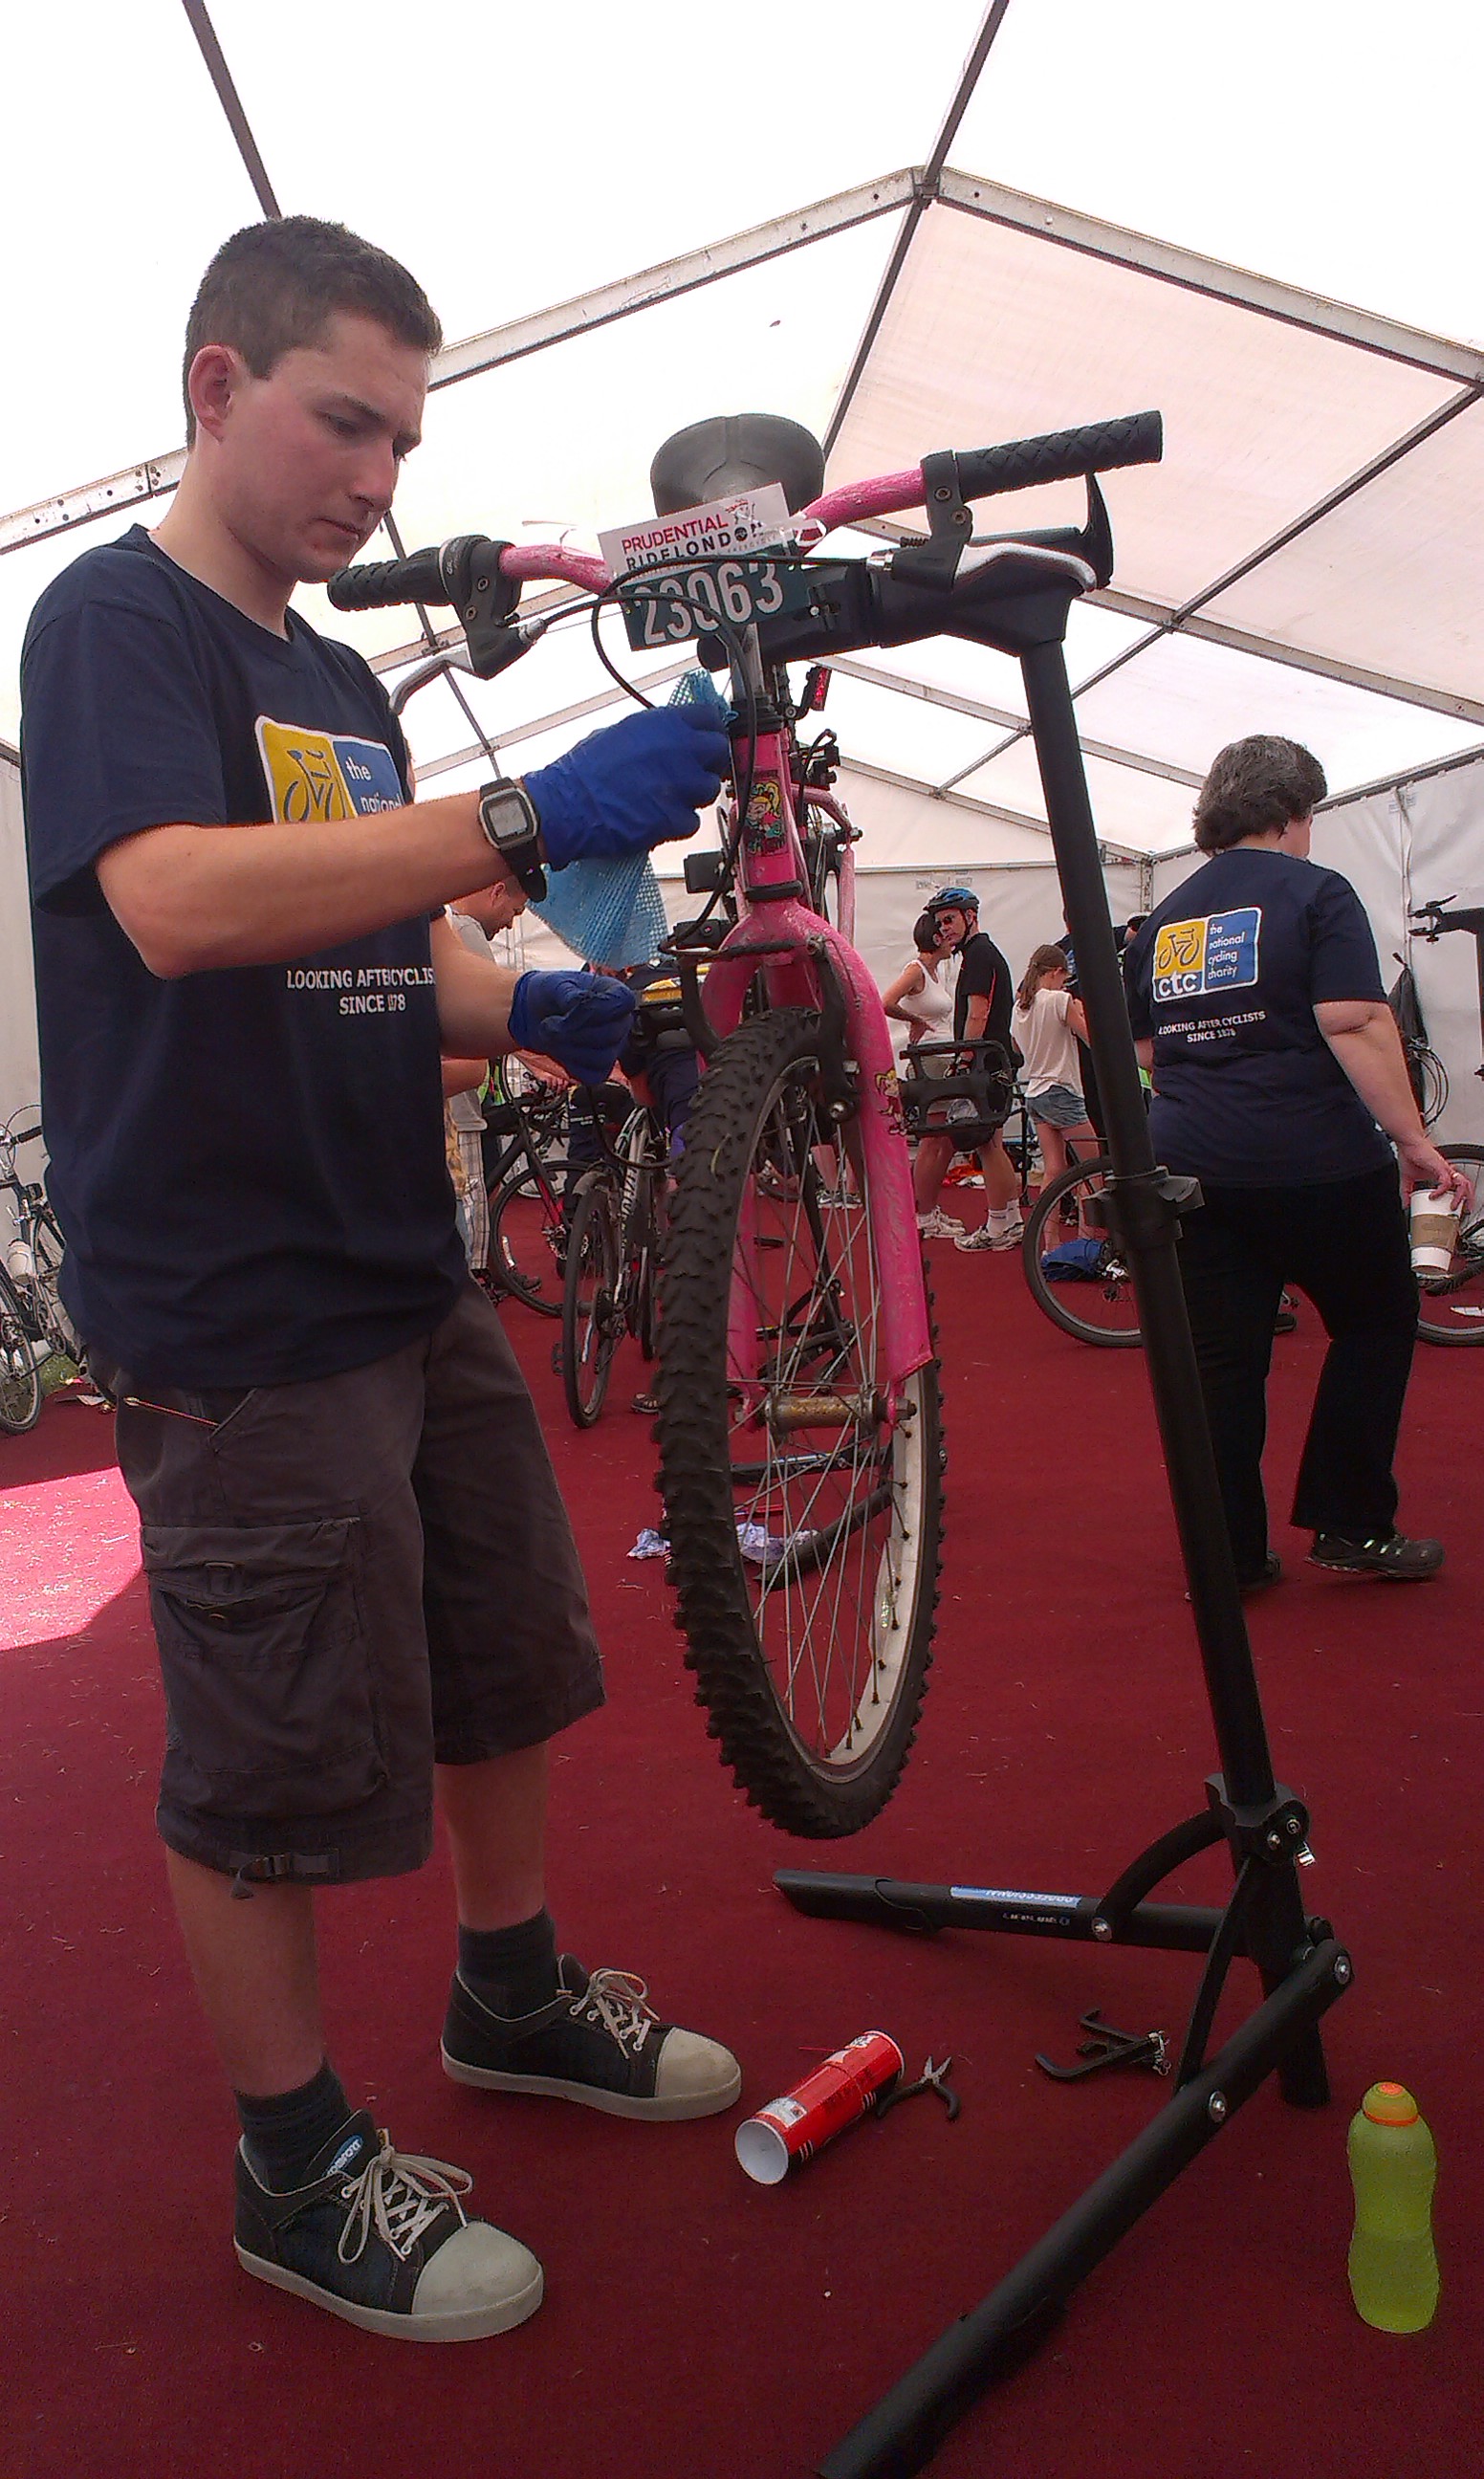 Another Dr Bike volunteer fixing a Freecycle bike